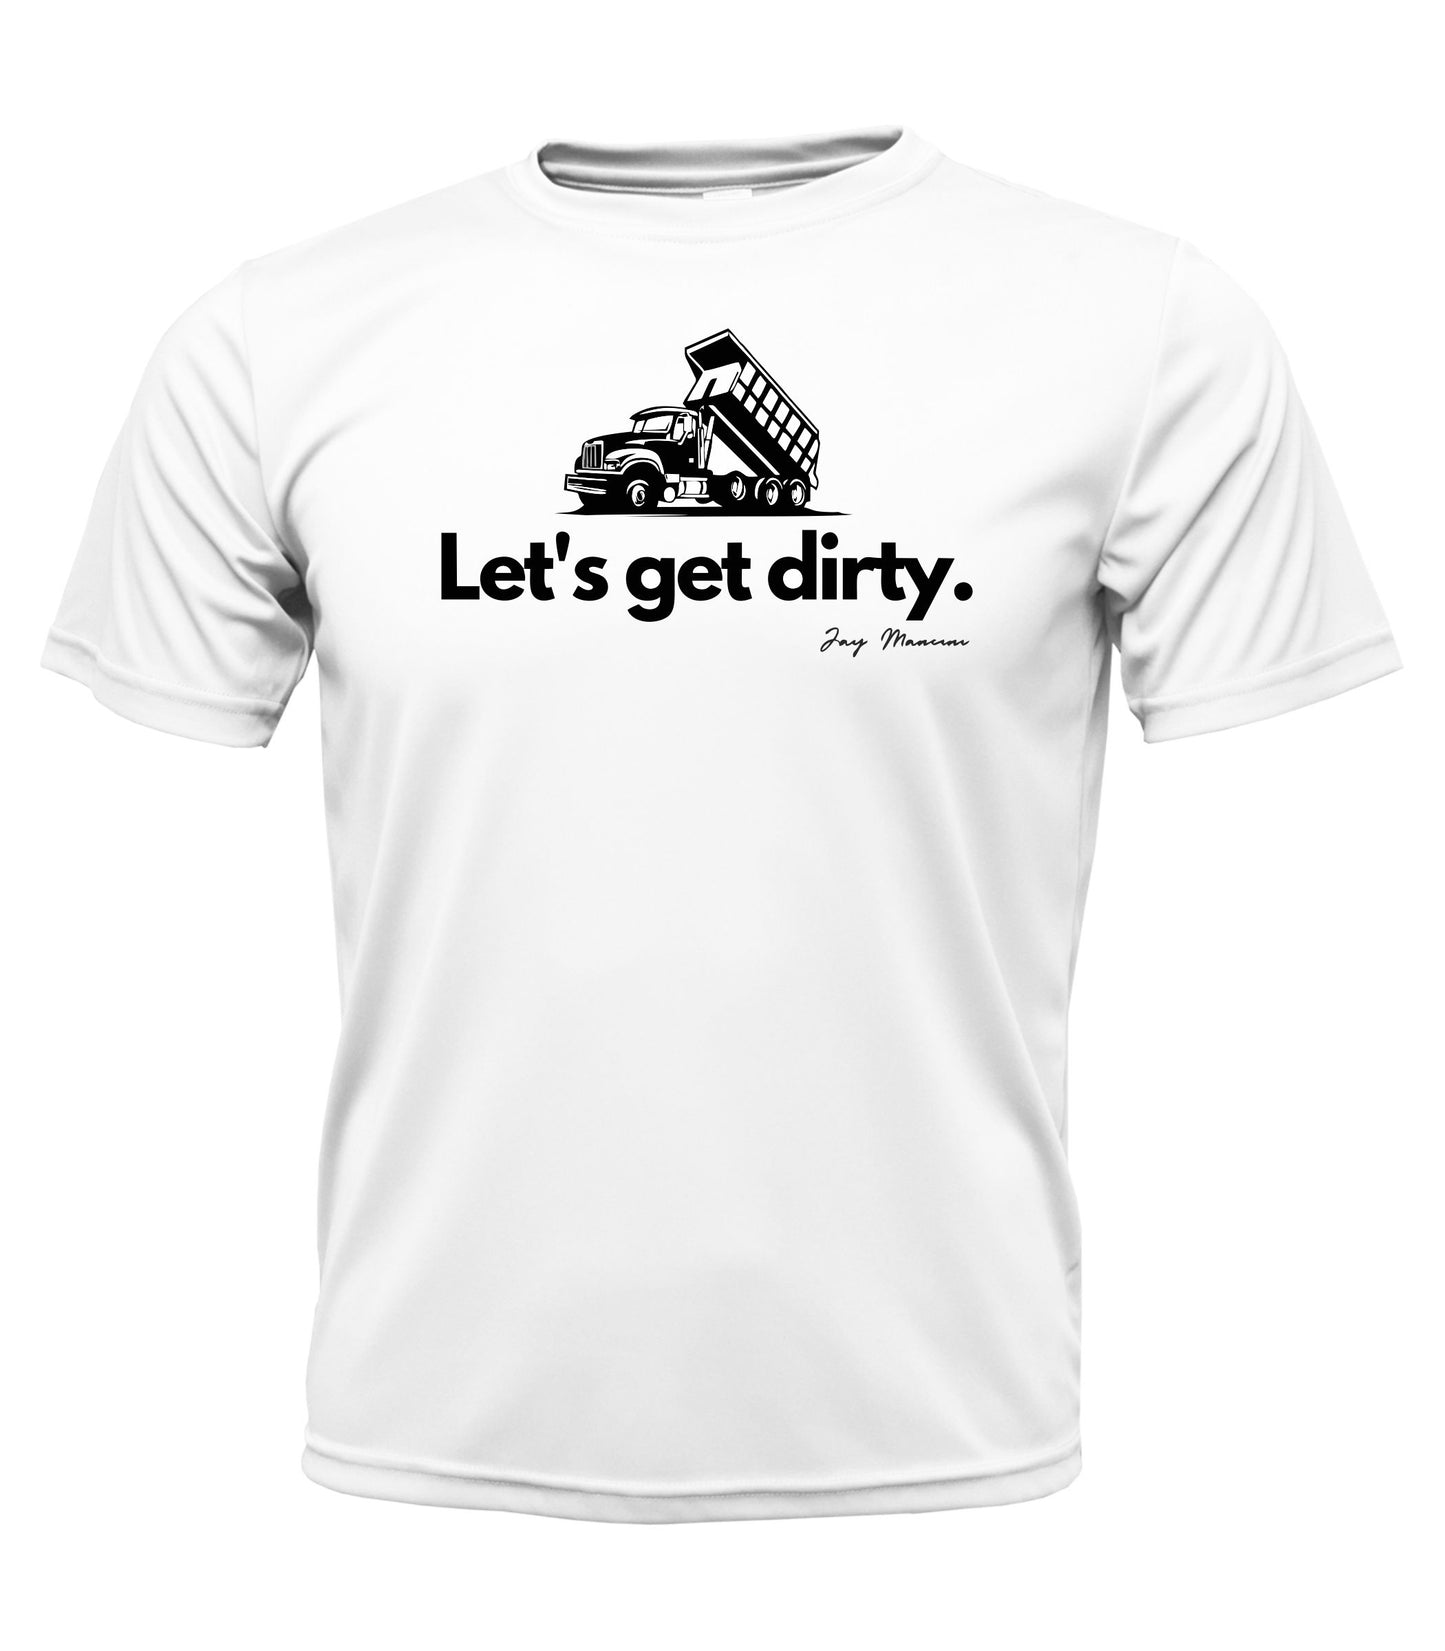 Let's get dirty - Cotton T-shirt